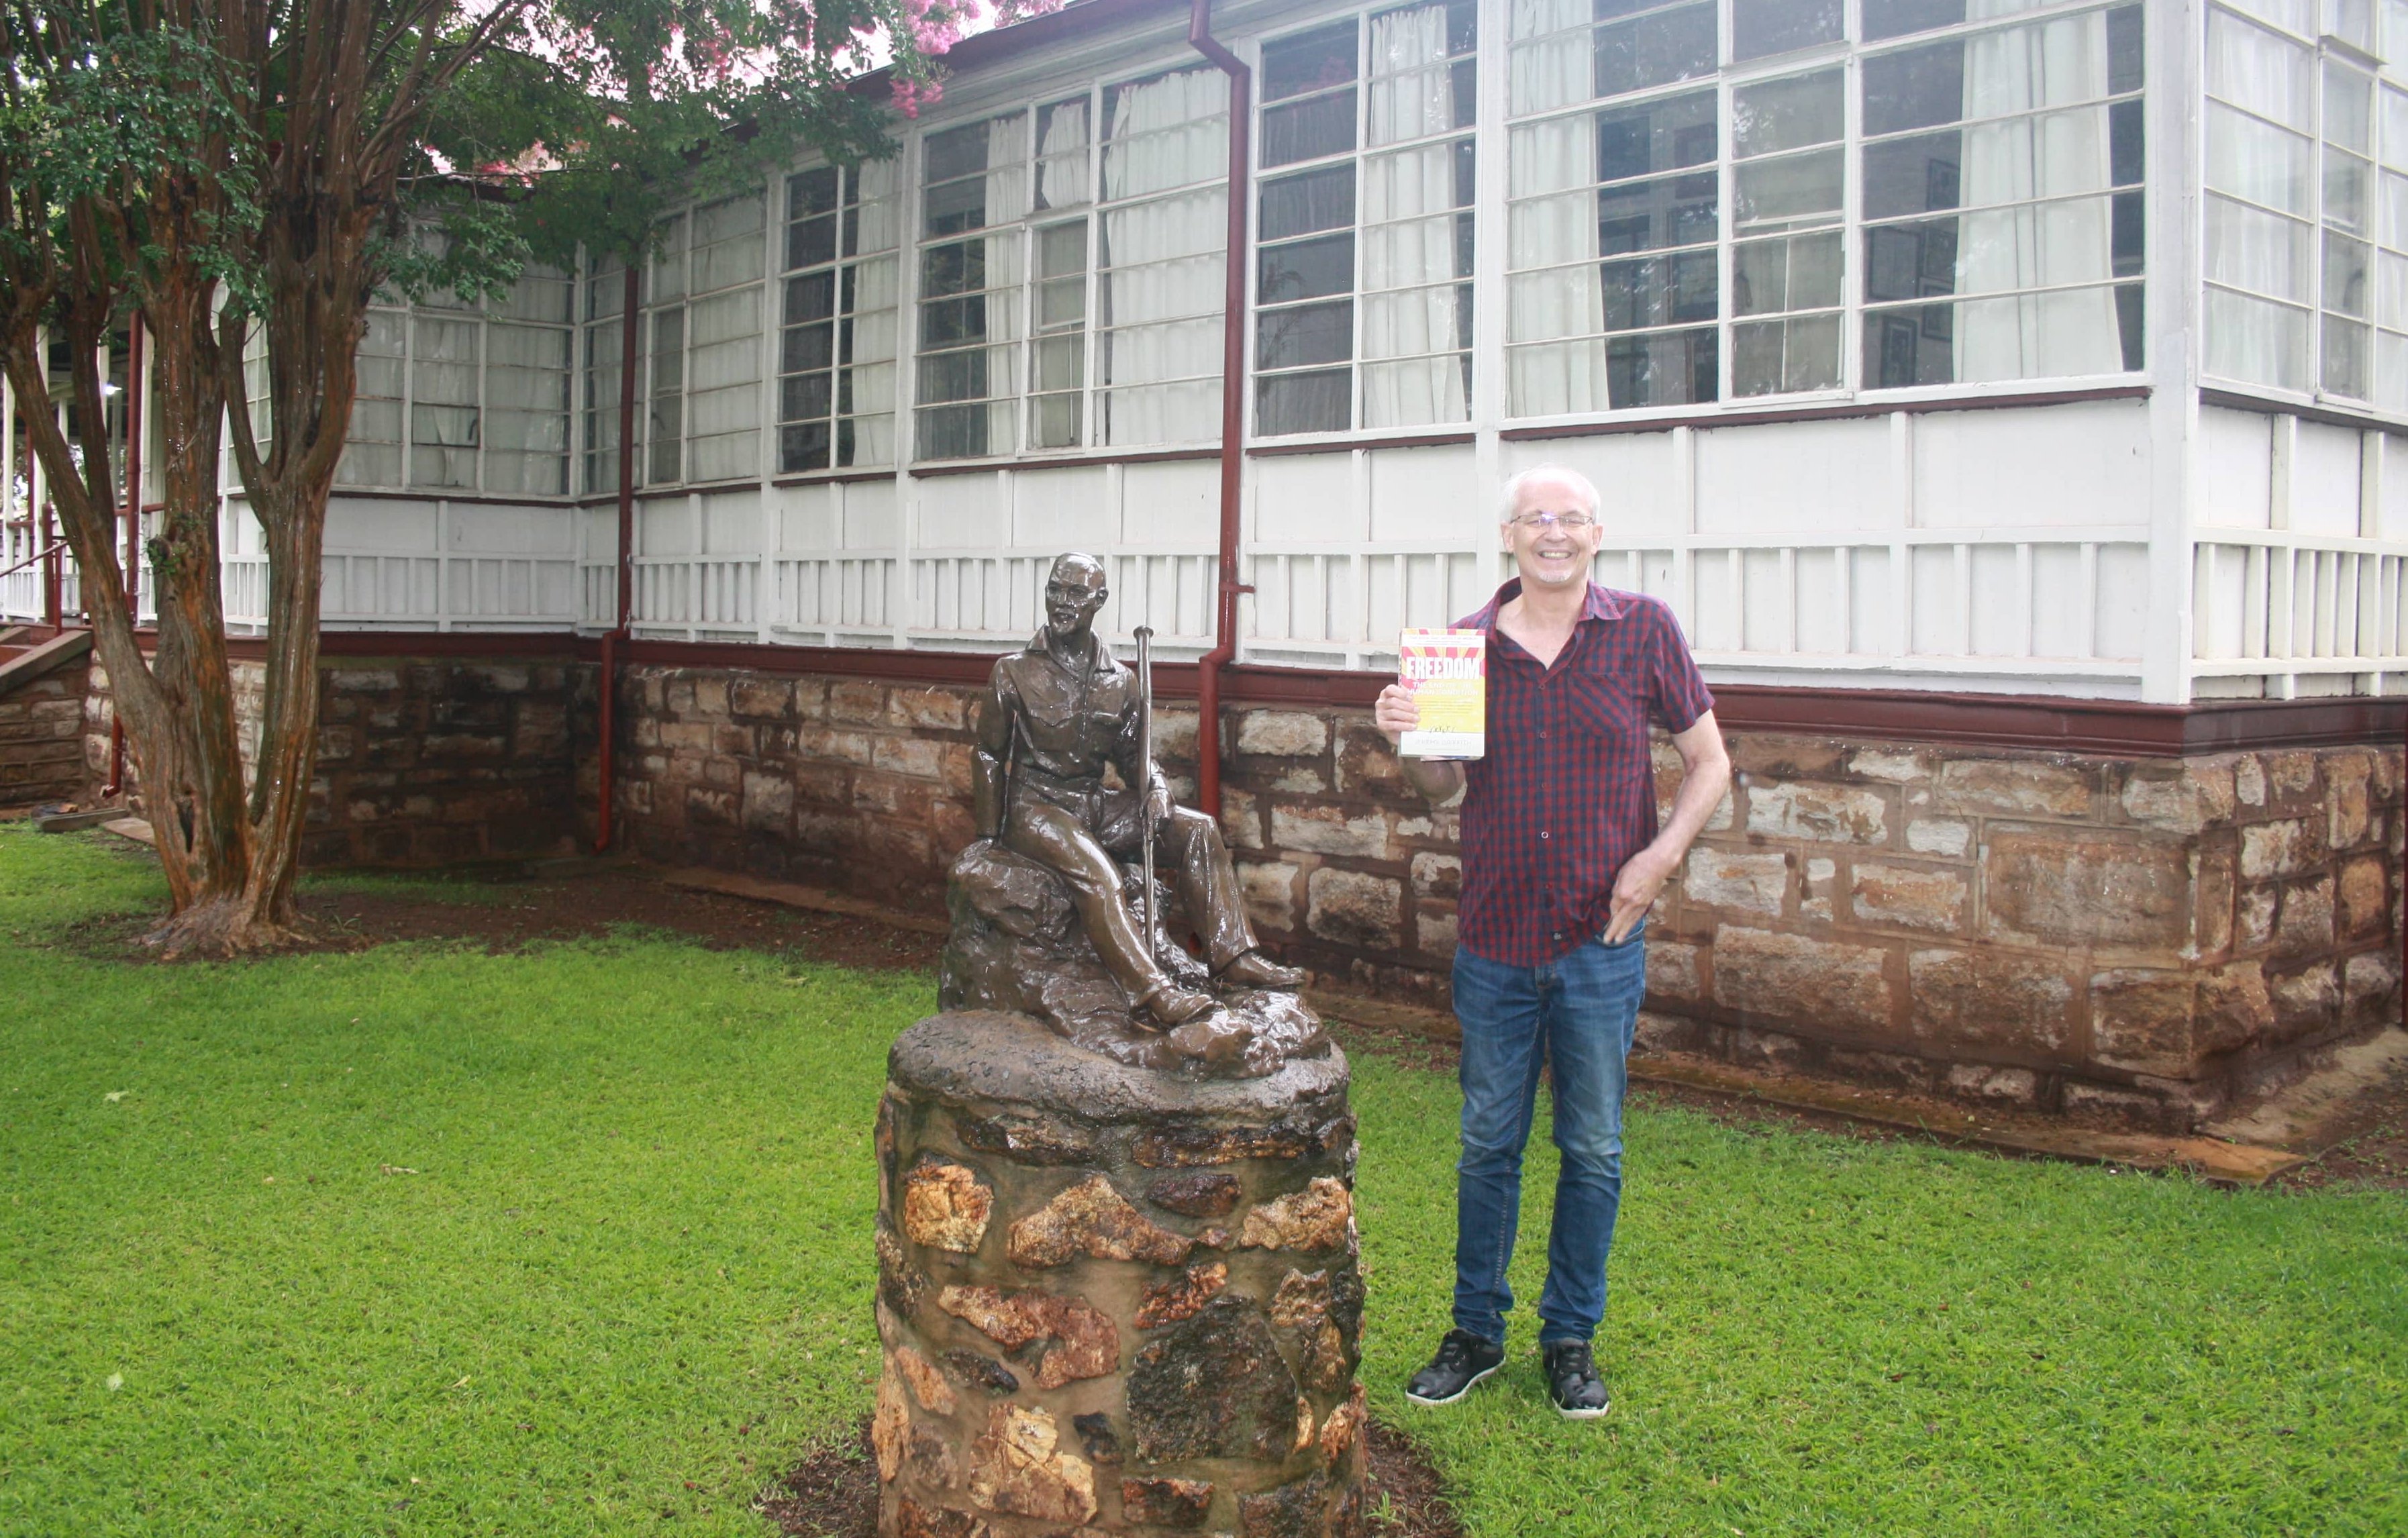 Cees, with his copy of 'FREEDOM', at Smuts House Museum, which is dedicated to the legacy of the South African statesman, military leader and philosopher, Jan Smuts